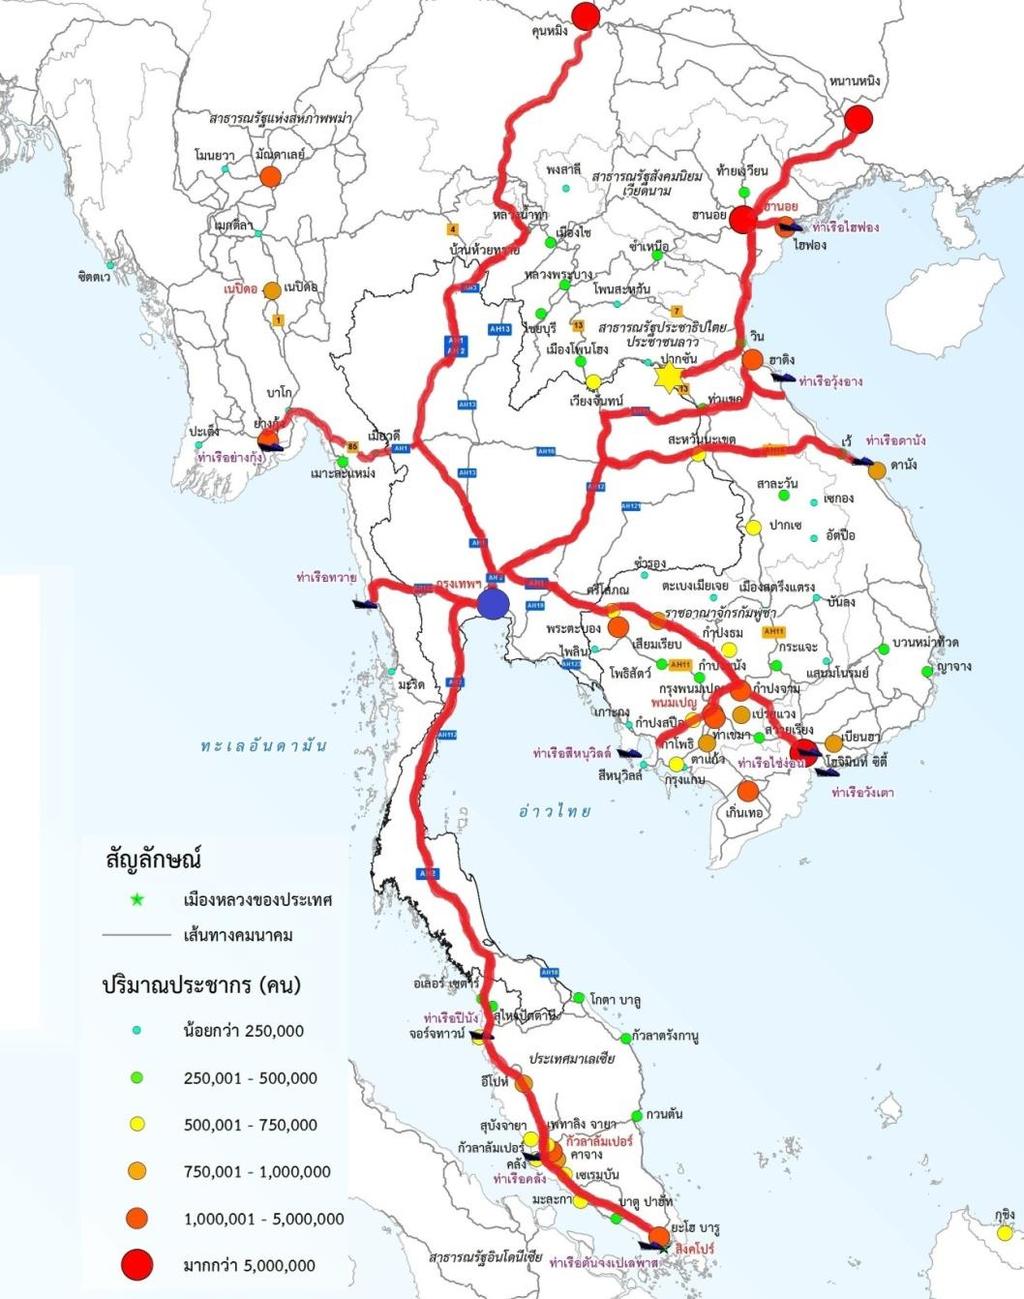 Transit routes of ASEAN member countries Transportation & Trade Lane Laos PDR Are for foreign invester non industrial Estate / focus on natural Myanmar Naypyidaw/ Yangon/Thilawa : Support Industrial